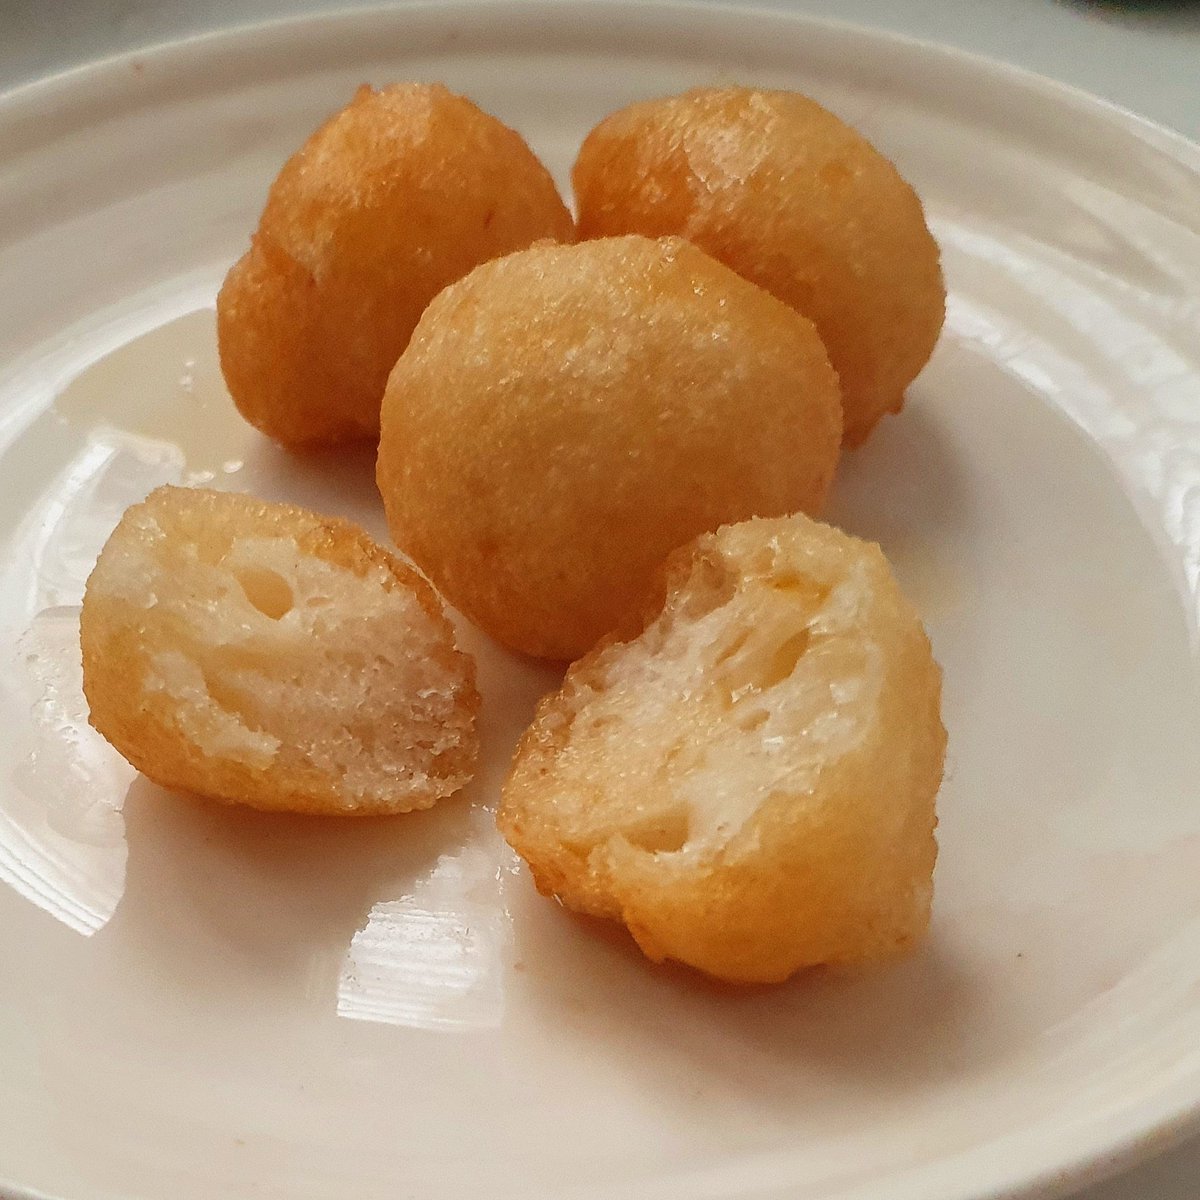 Epiphany Day today and in Cyprus we eat loukoumades (sweet fried dough balls dipped in syrup) and also throw them on the roof to keep goblins away.

You got to love Cypriot folklore!

#food #foodie #sweet #tradition #loukoumades #cypriotcuisine